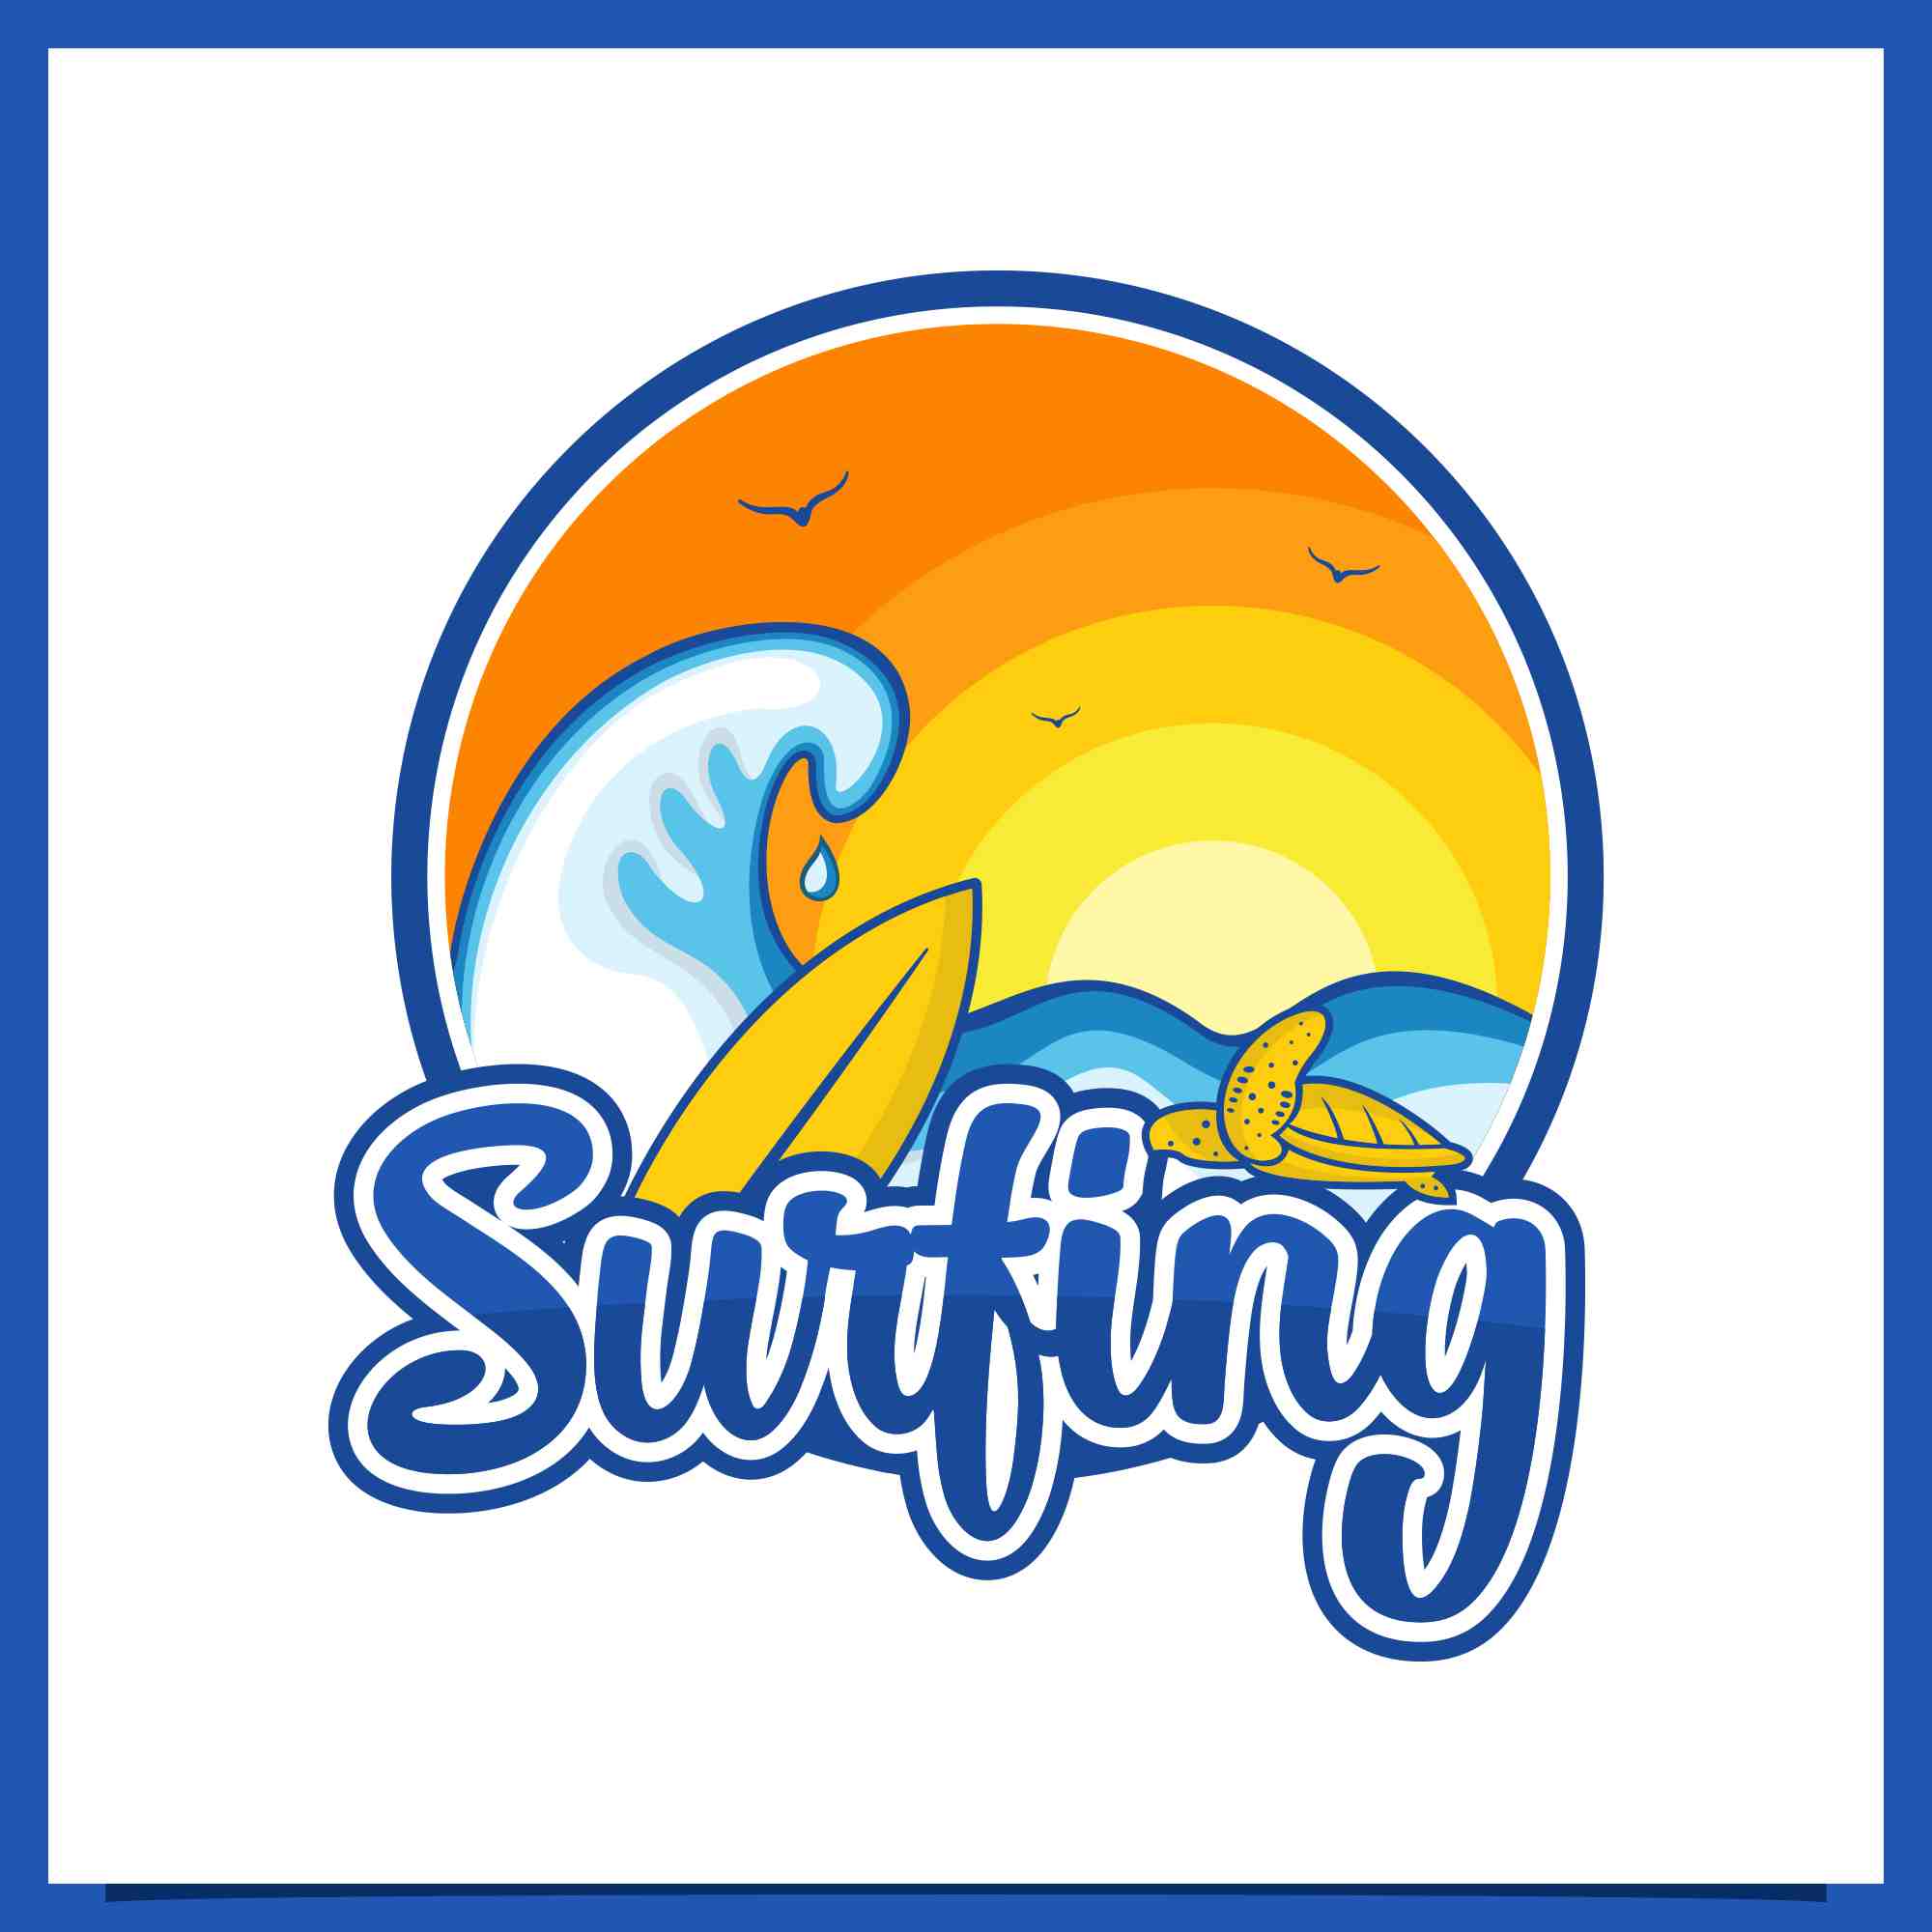 Set Surfing Club logo design collection - $4 preview image.